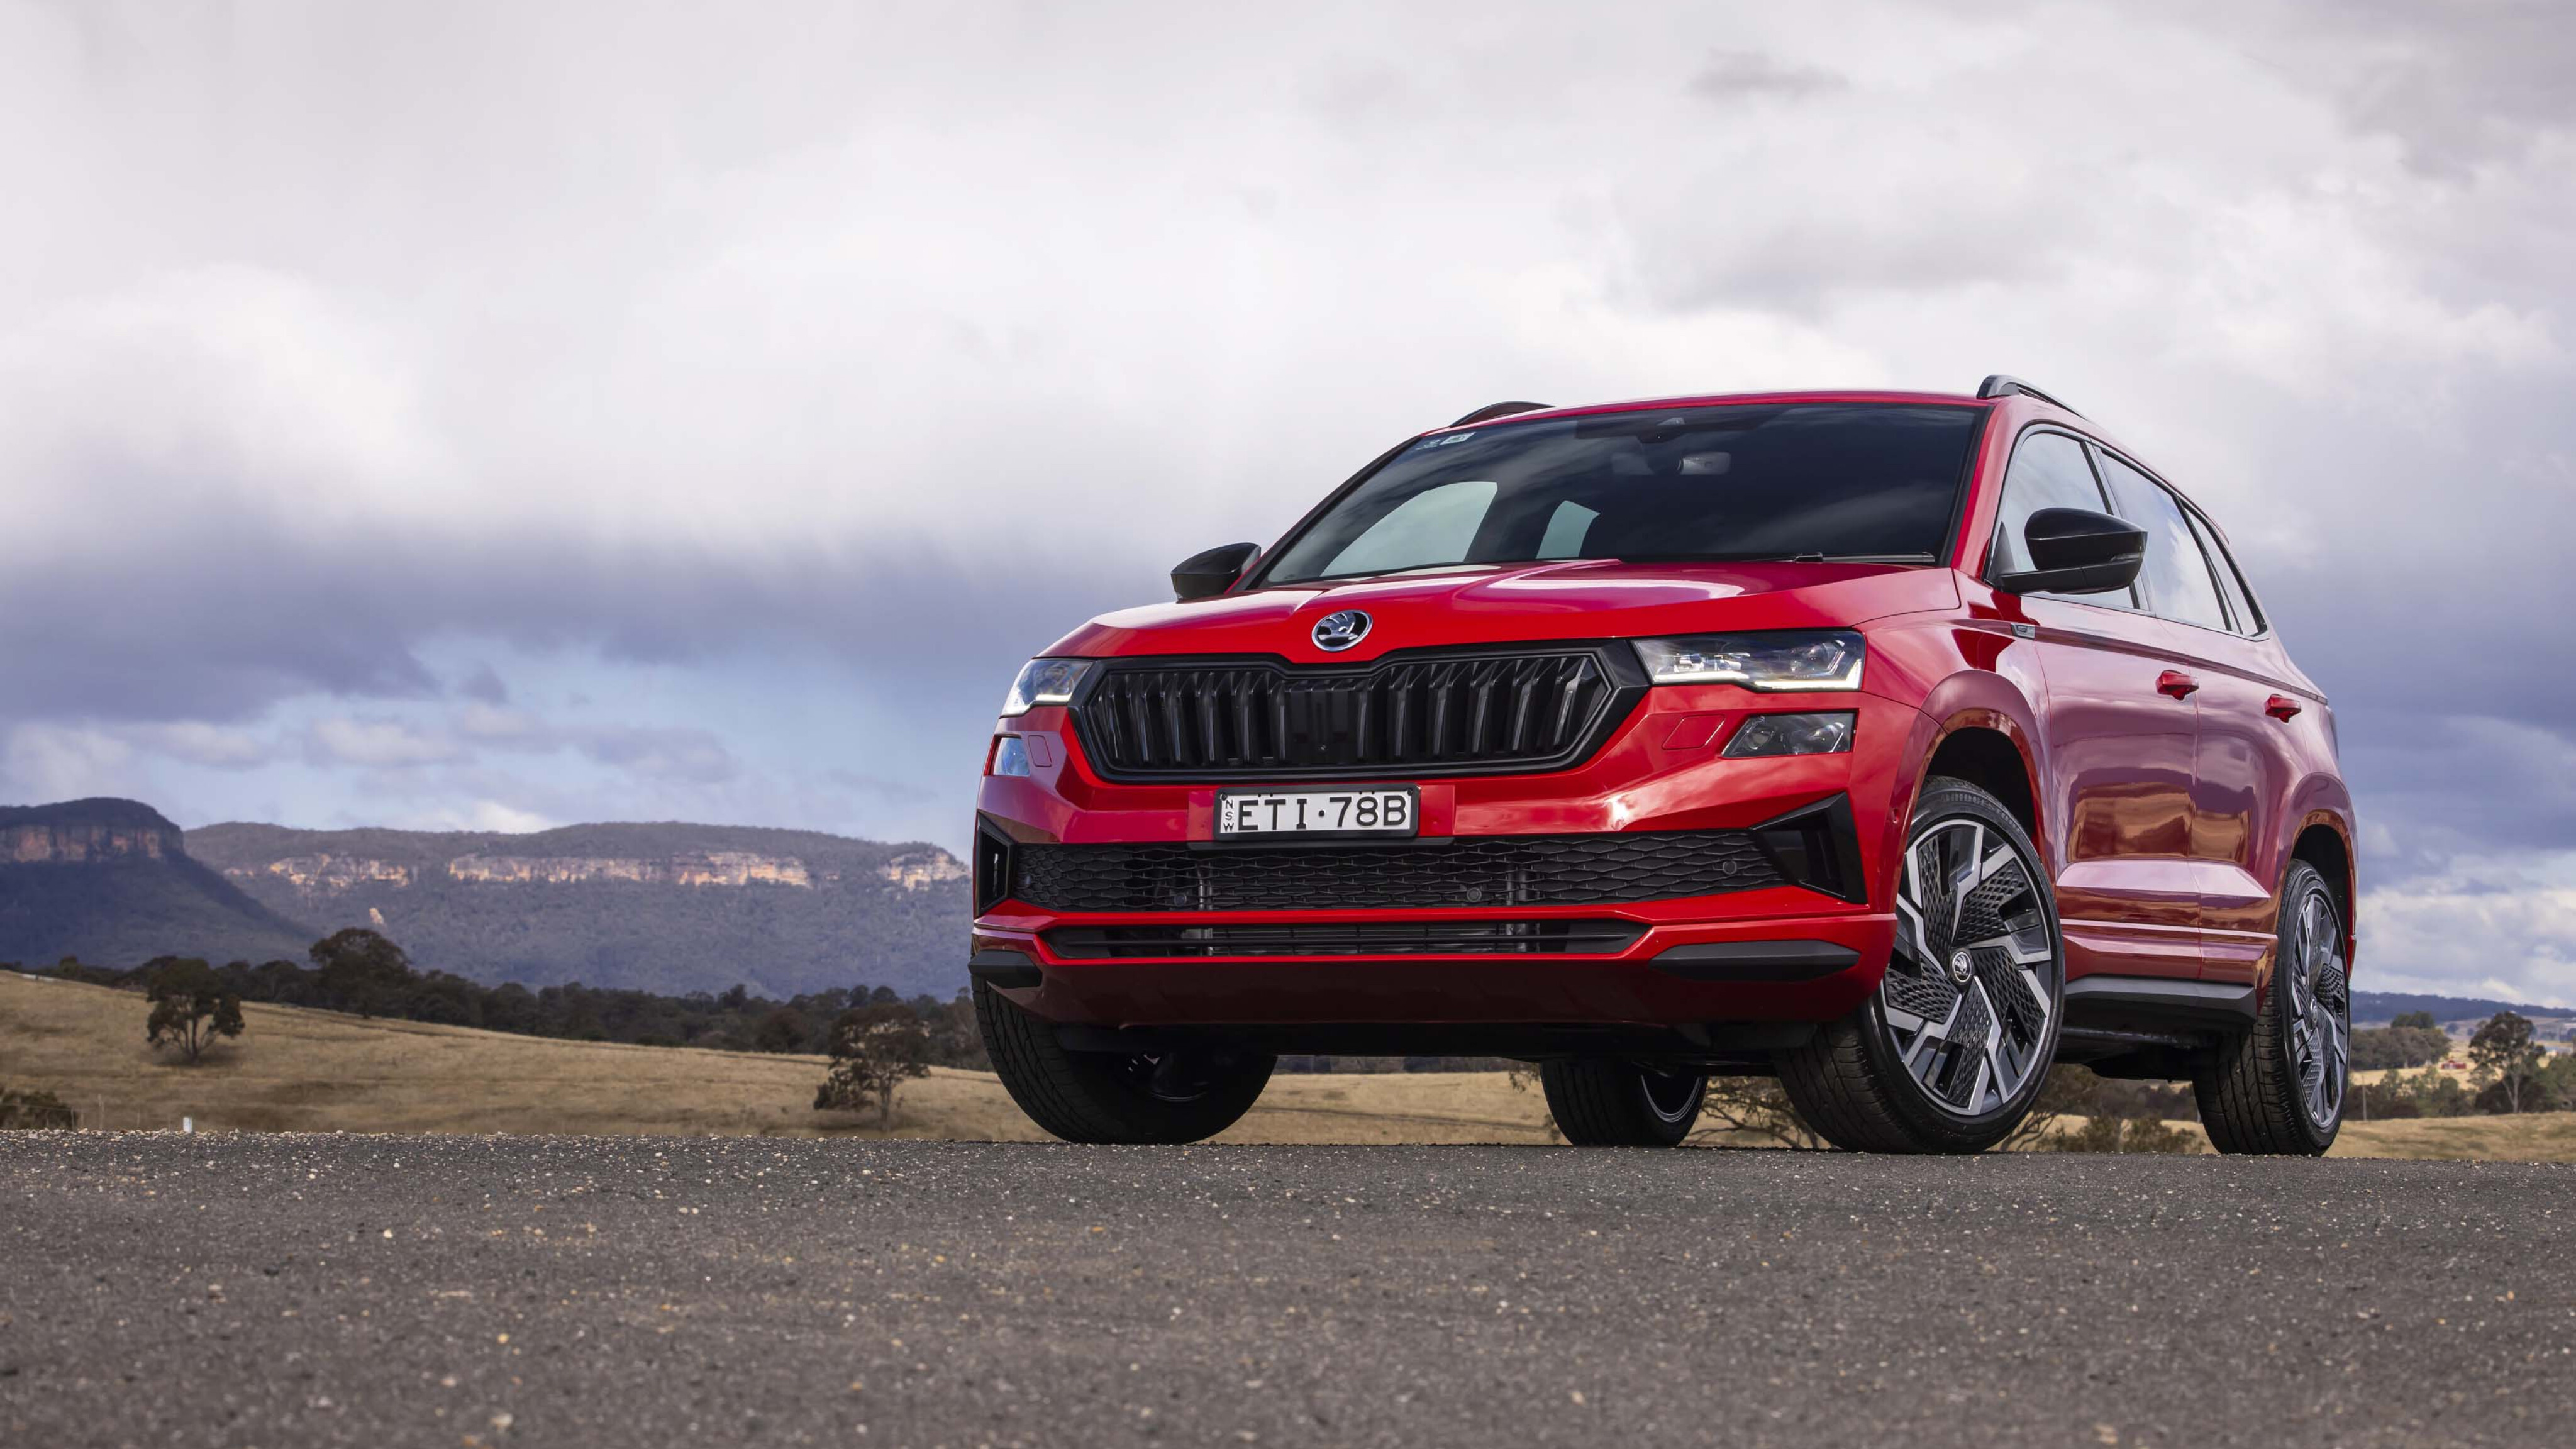 2022 Skoda Karoq: Everything you need to know about updated SUV